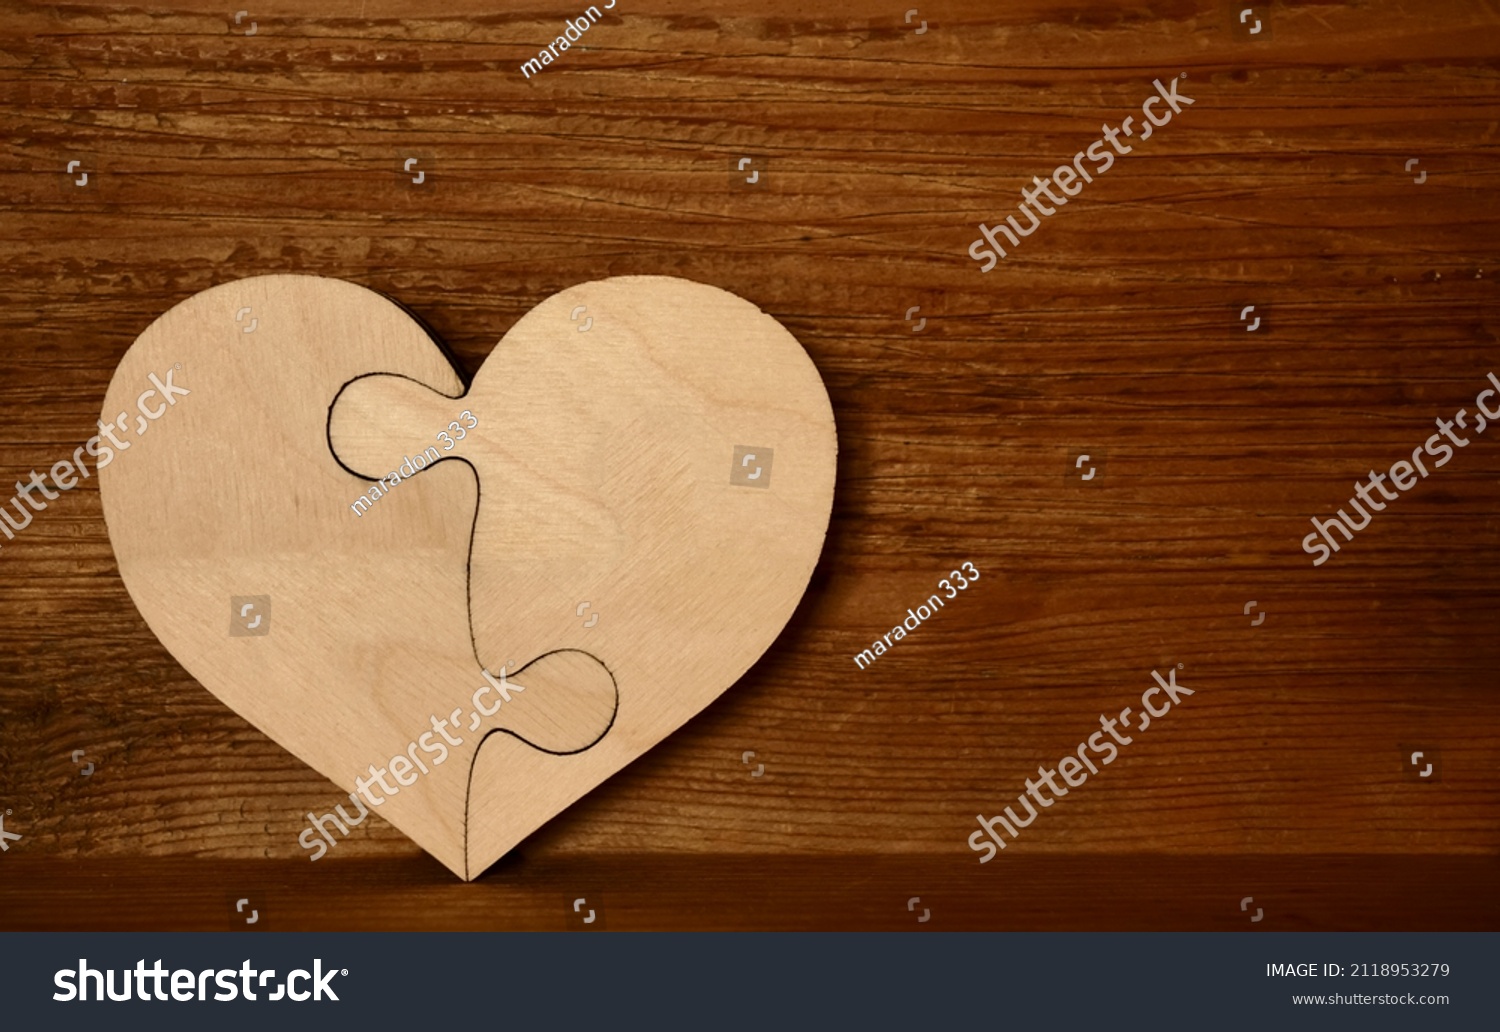 complete wooden heart shape jigsaw puzzle on wood board  background . 2 two pieces. two person in relationship.  #2118953279